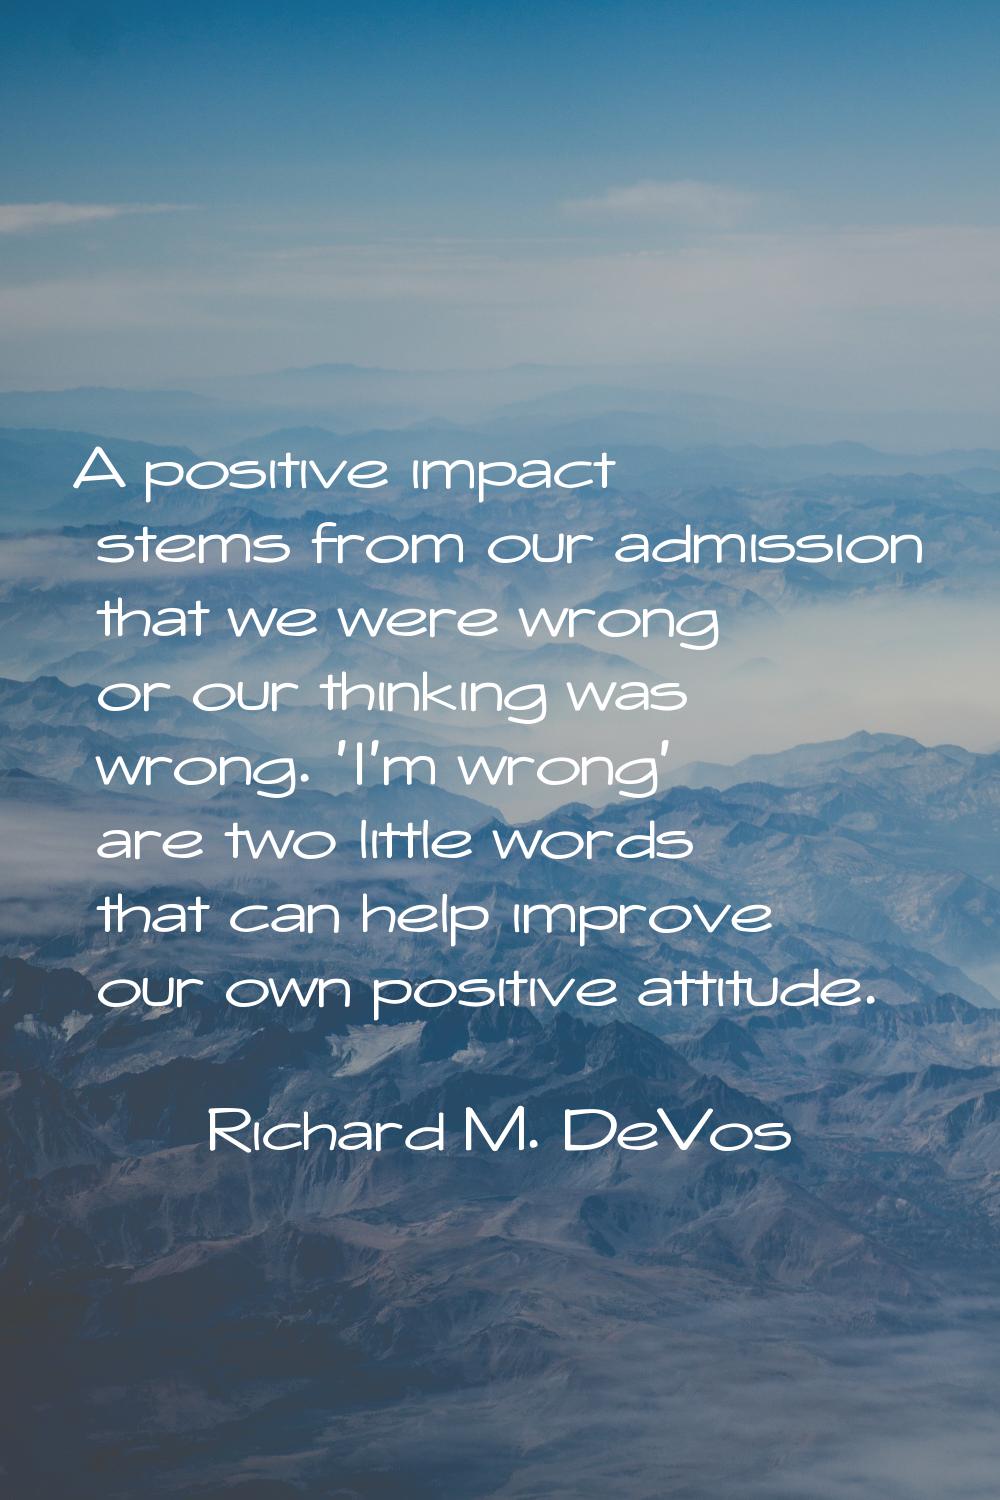 A positive impact stems from our admission that we were wrong or our thinking was wrong. 'I'm wrong